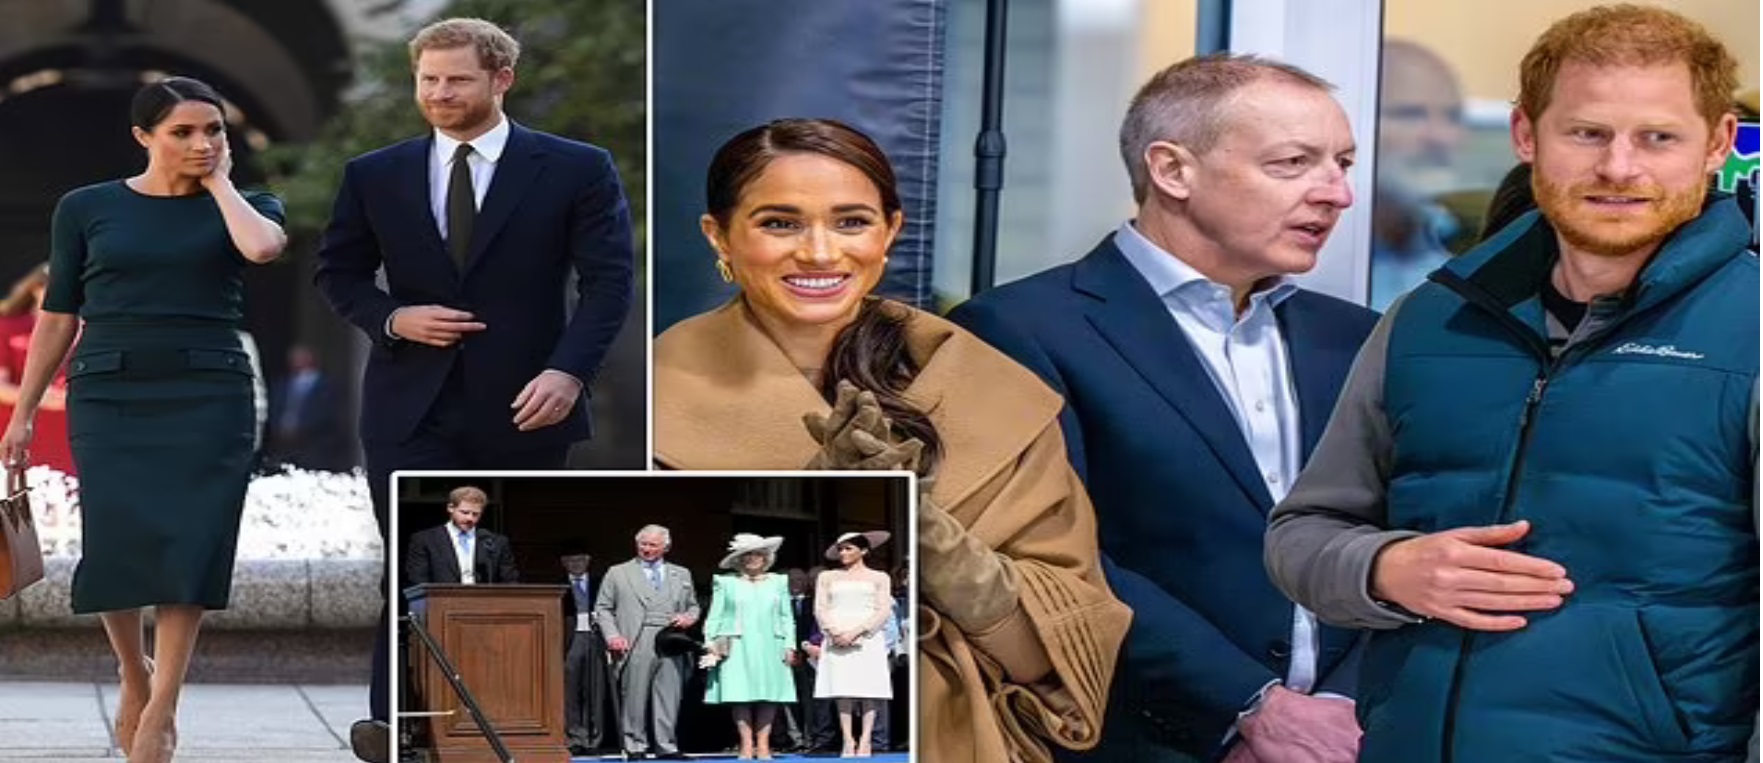 Meghan Markle married into the Royal Family and thought "she could change the institution", and now that she’s back living in the US, the American public is "starting to see through her"